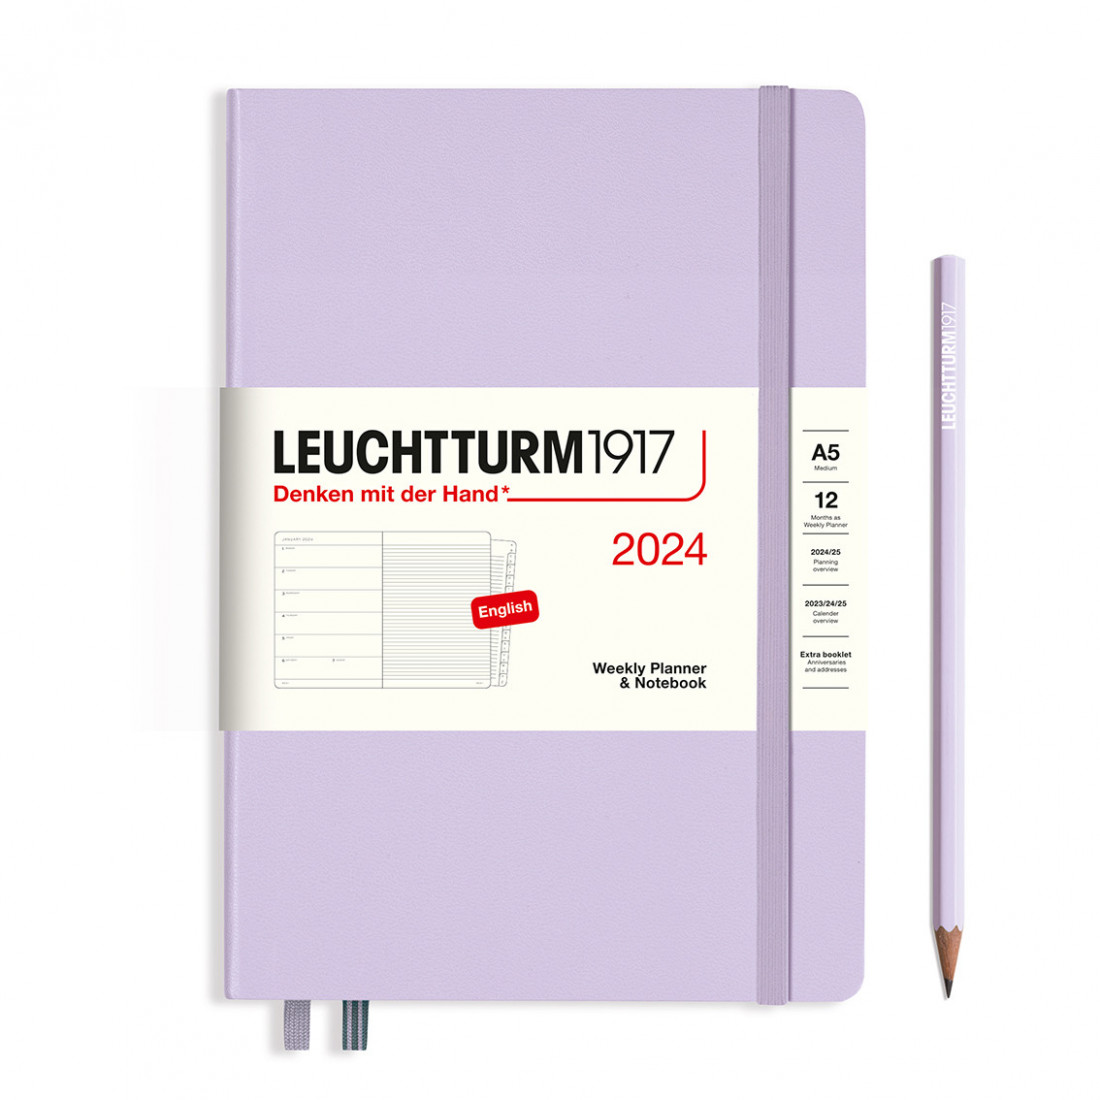 Leuchtturm 1917 Weekly Planner and Notebook 2024 Lilac Medium A5 Hard Cover